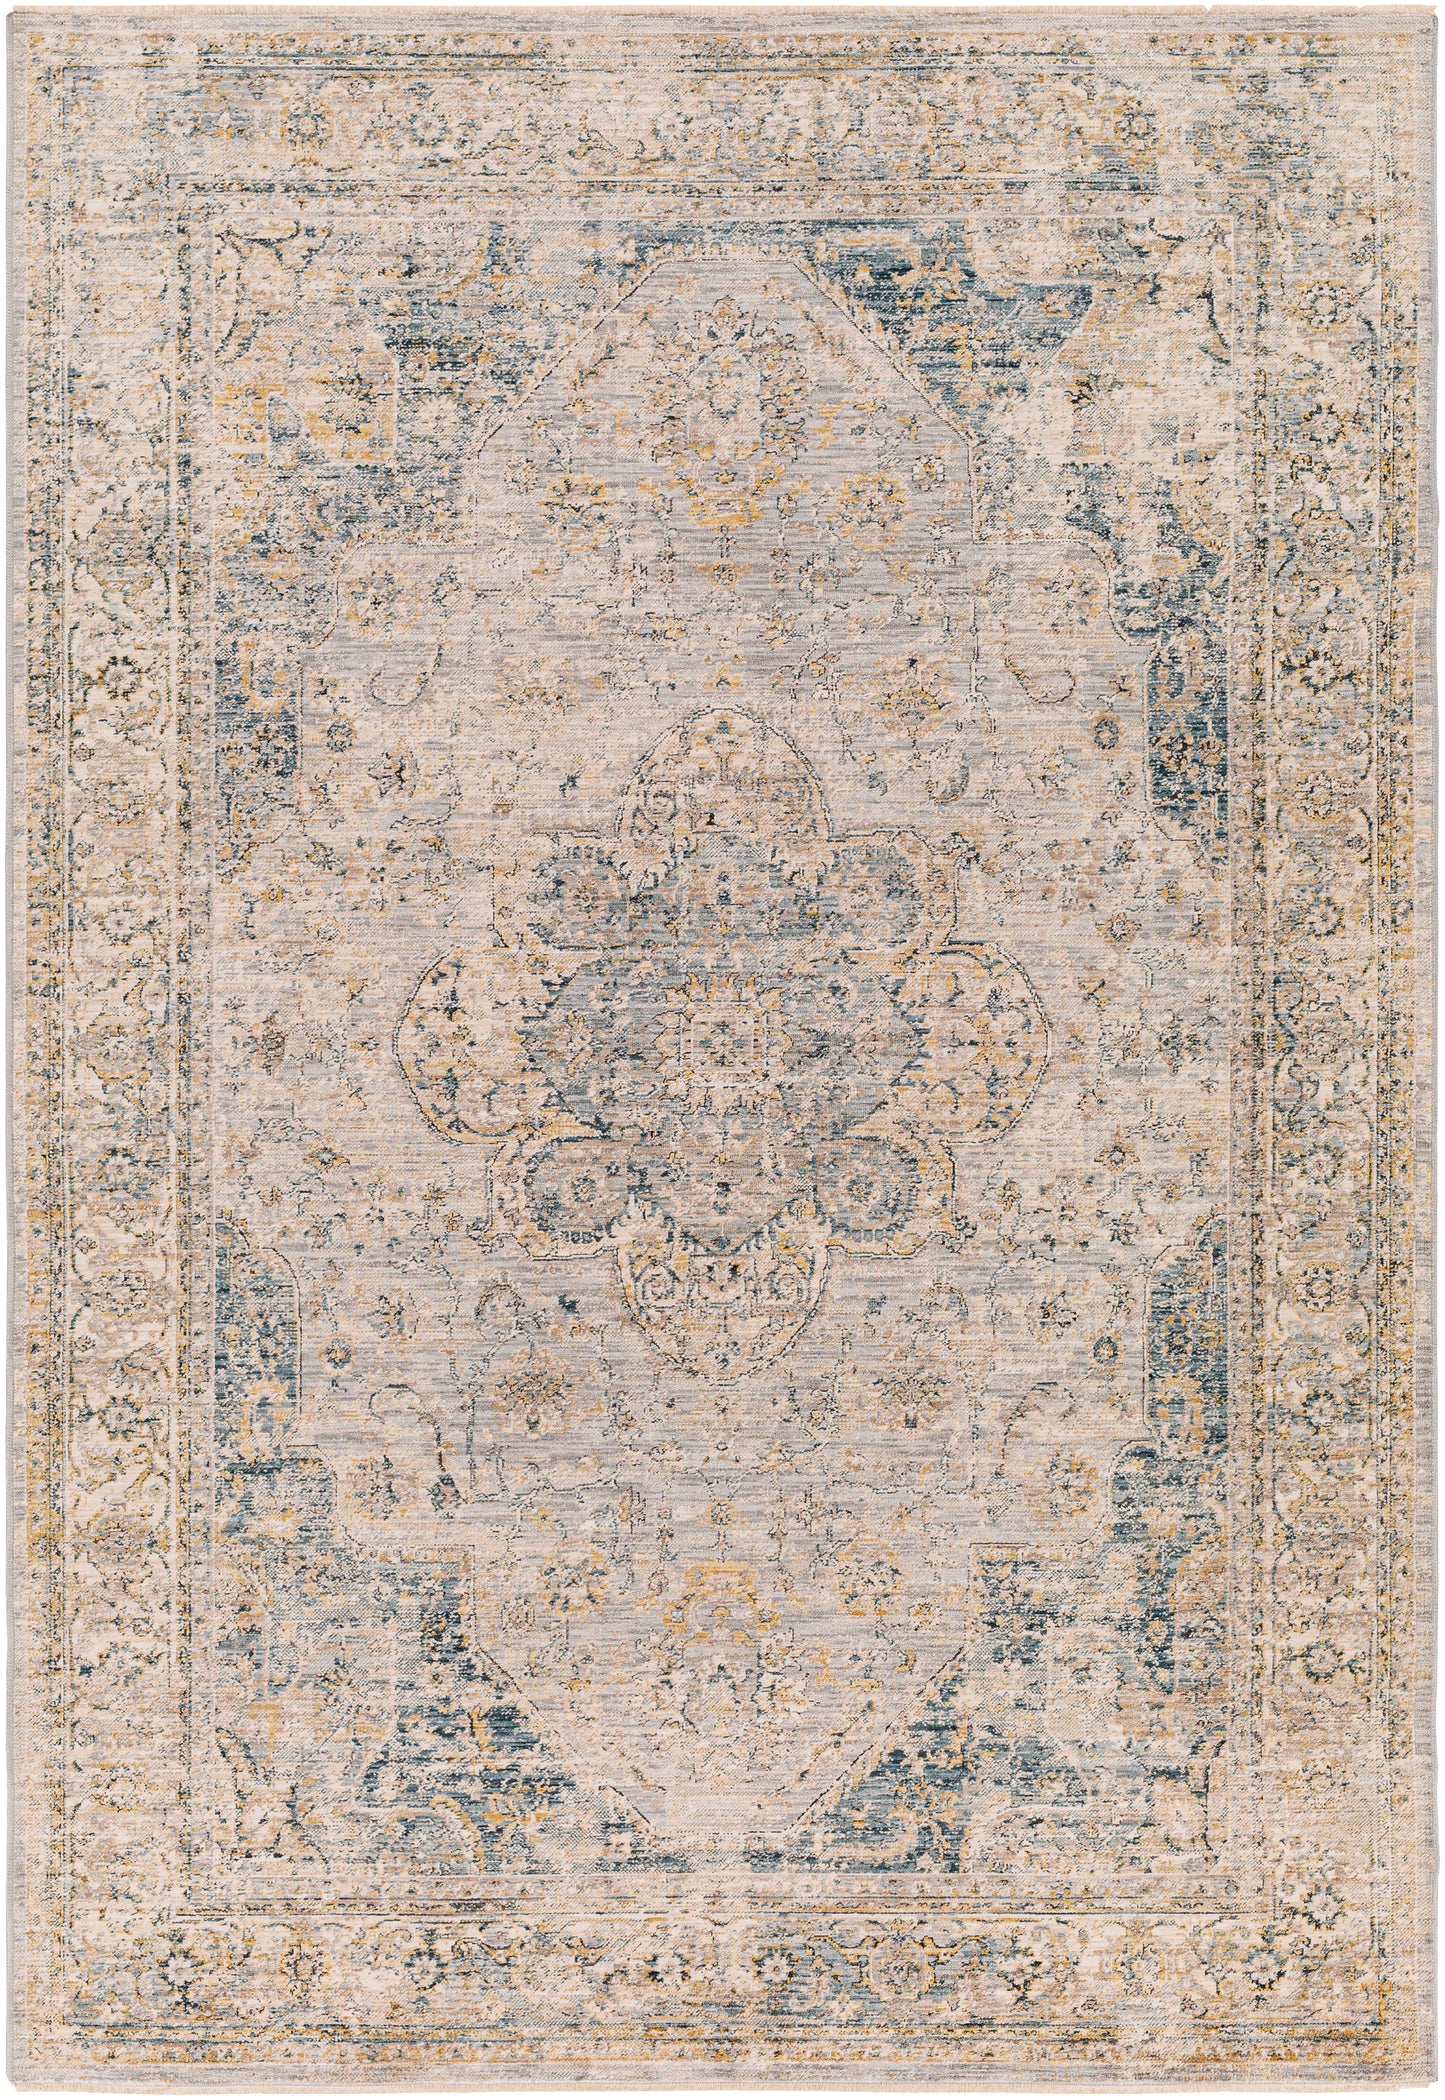 Aspendos 30432 Machine Woven Synthetic Blend Indoor Area Rug by Surya Rugs